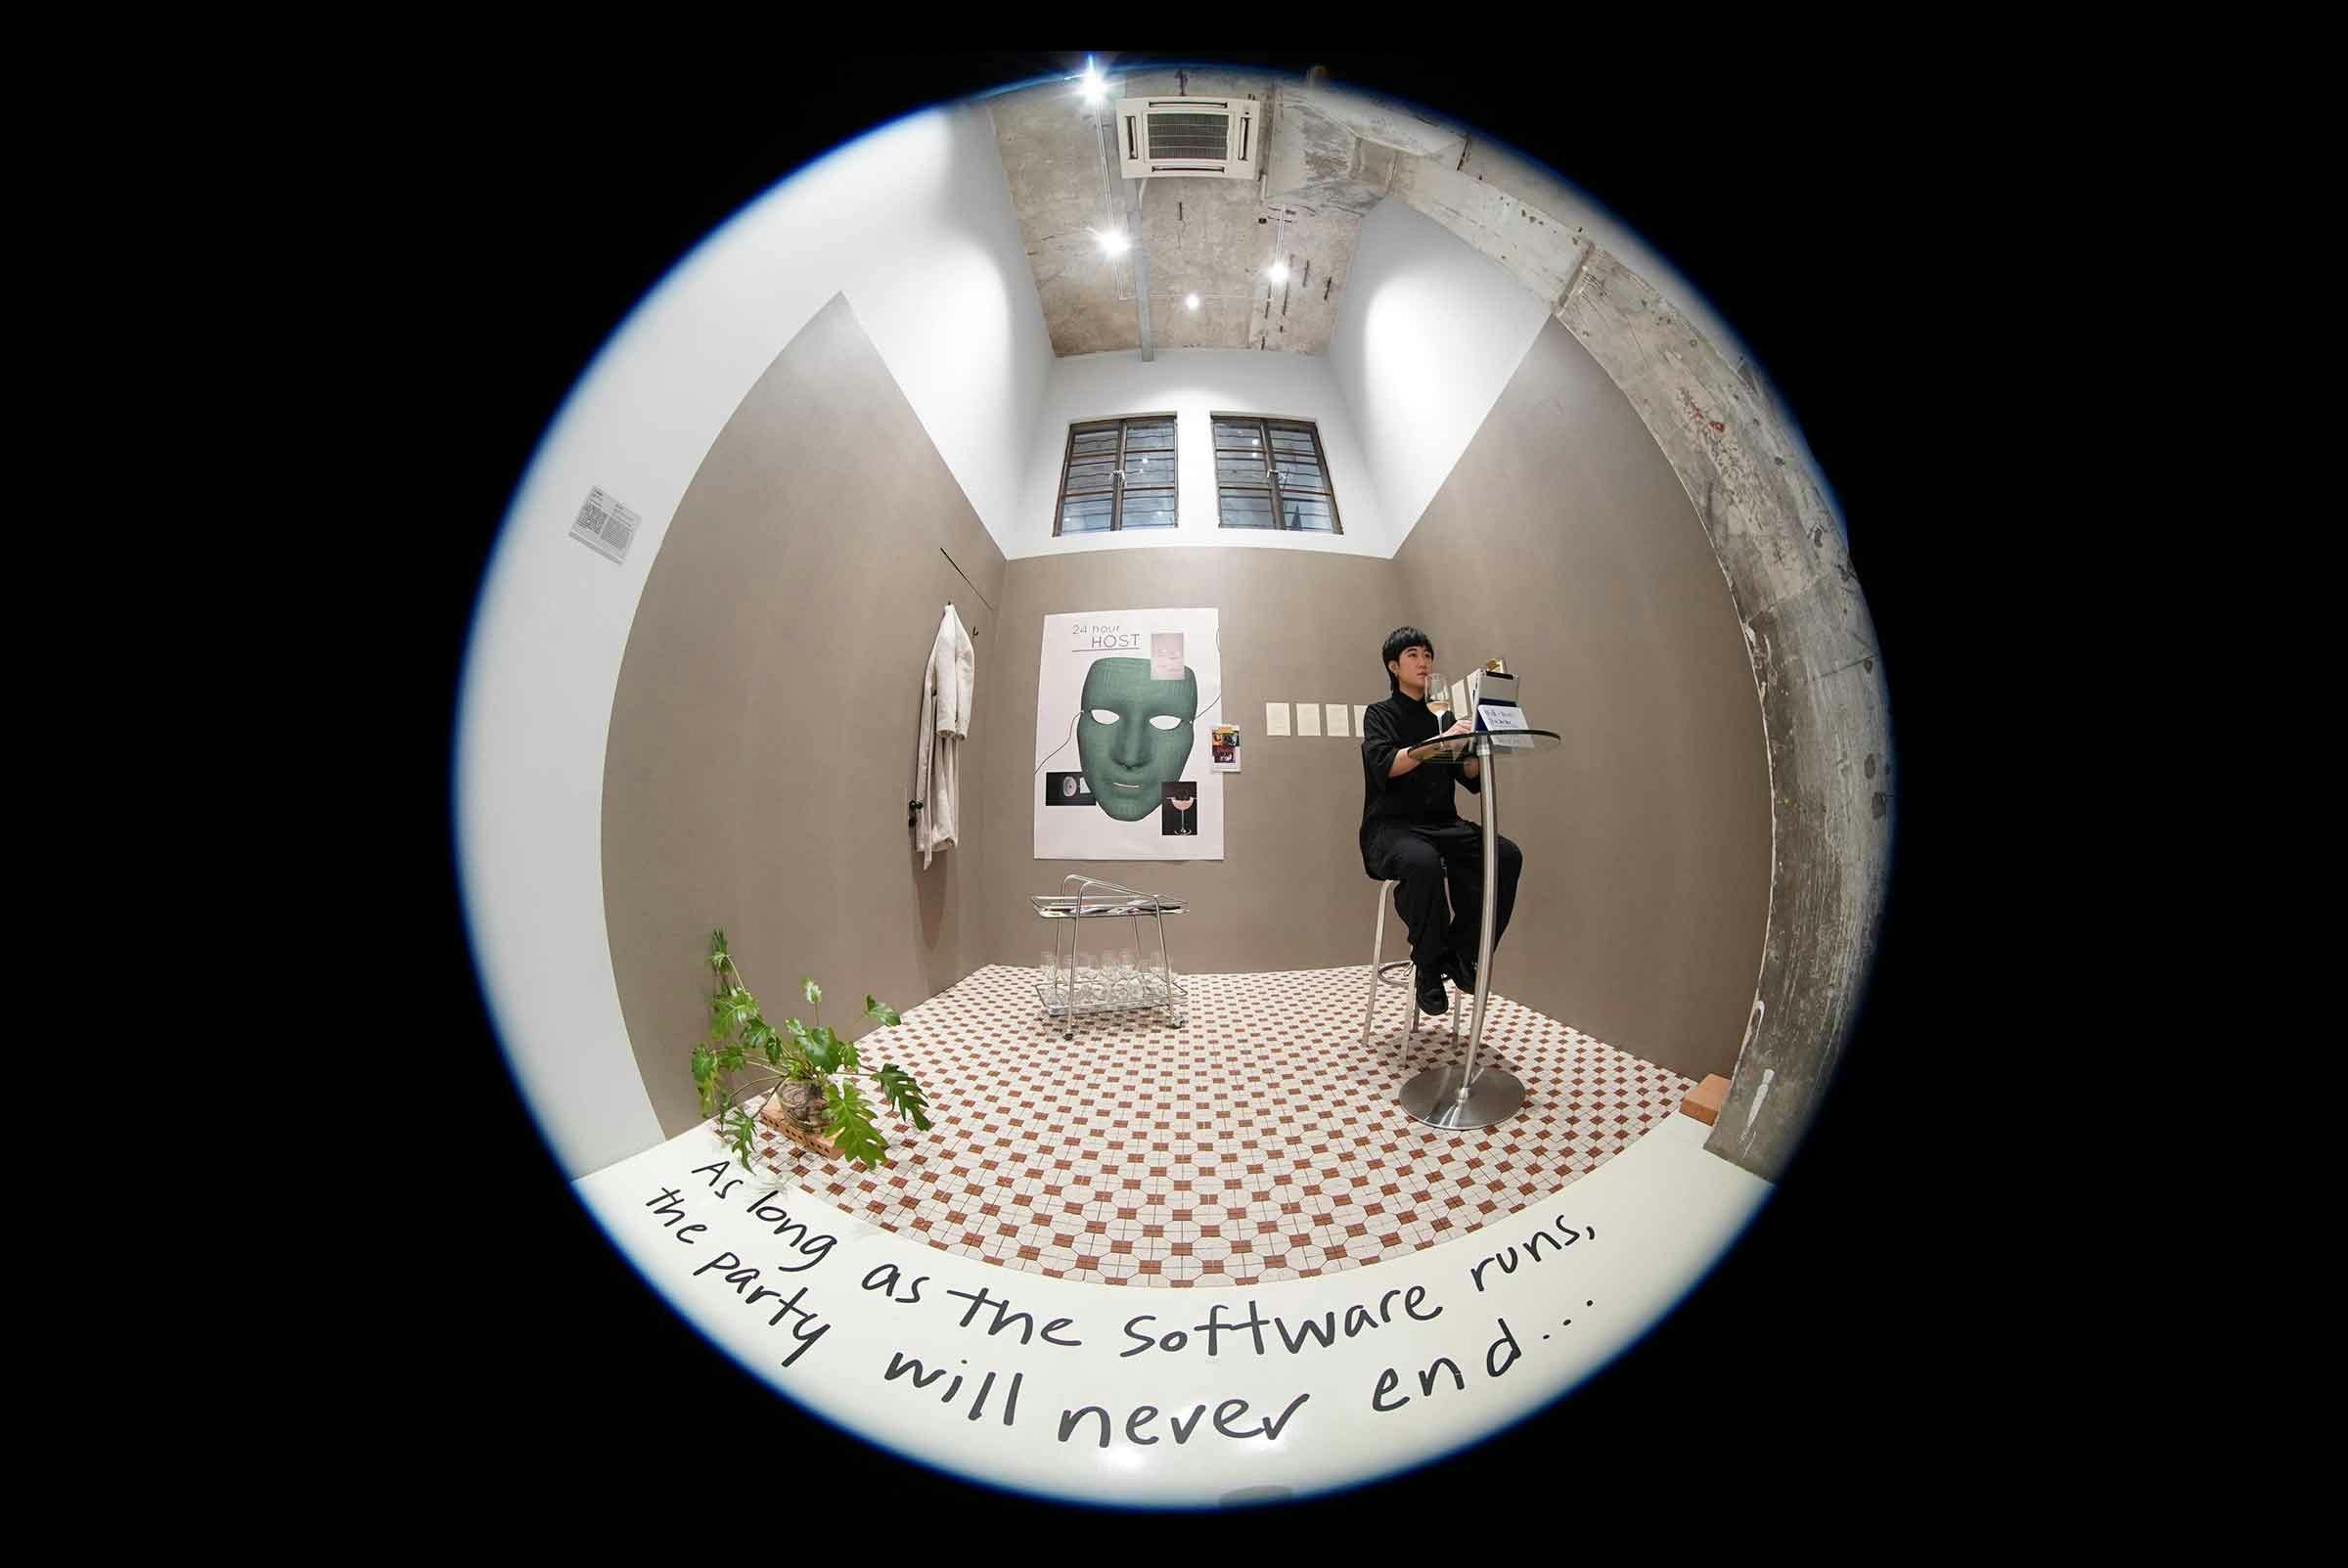 Fisheye lens image of an individual sitting at a small table in a small room with a plant and posters on the wall